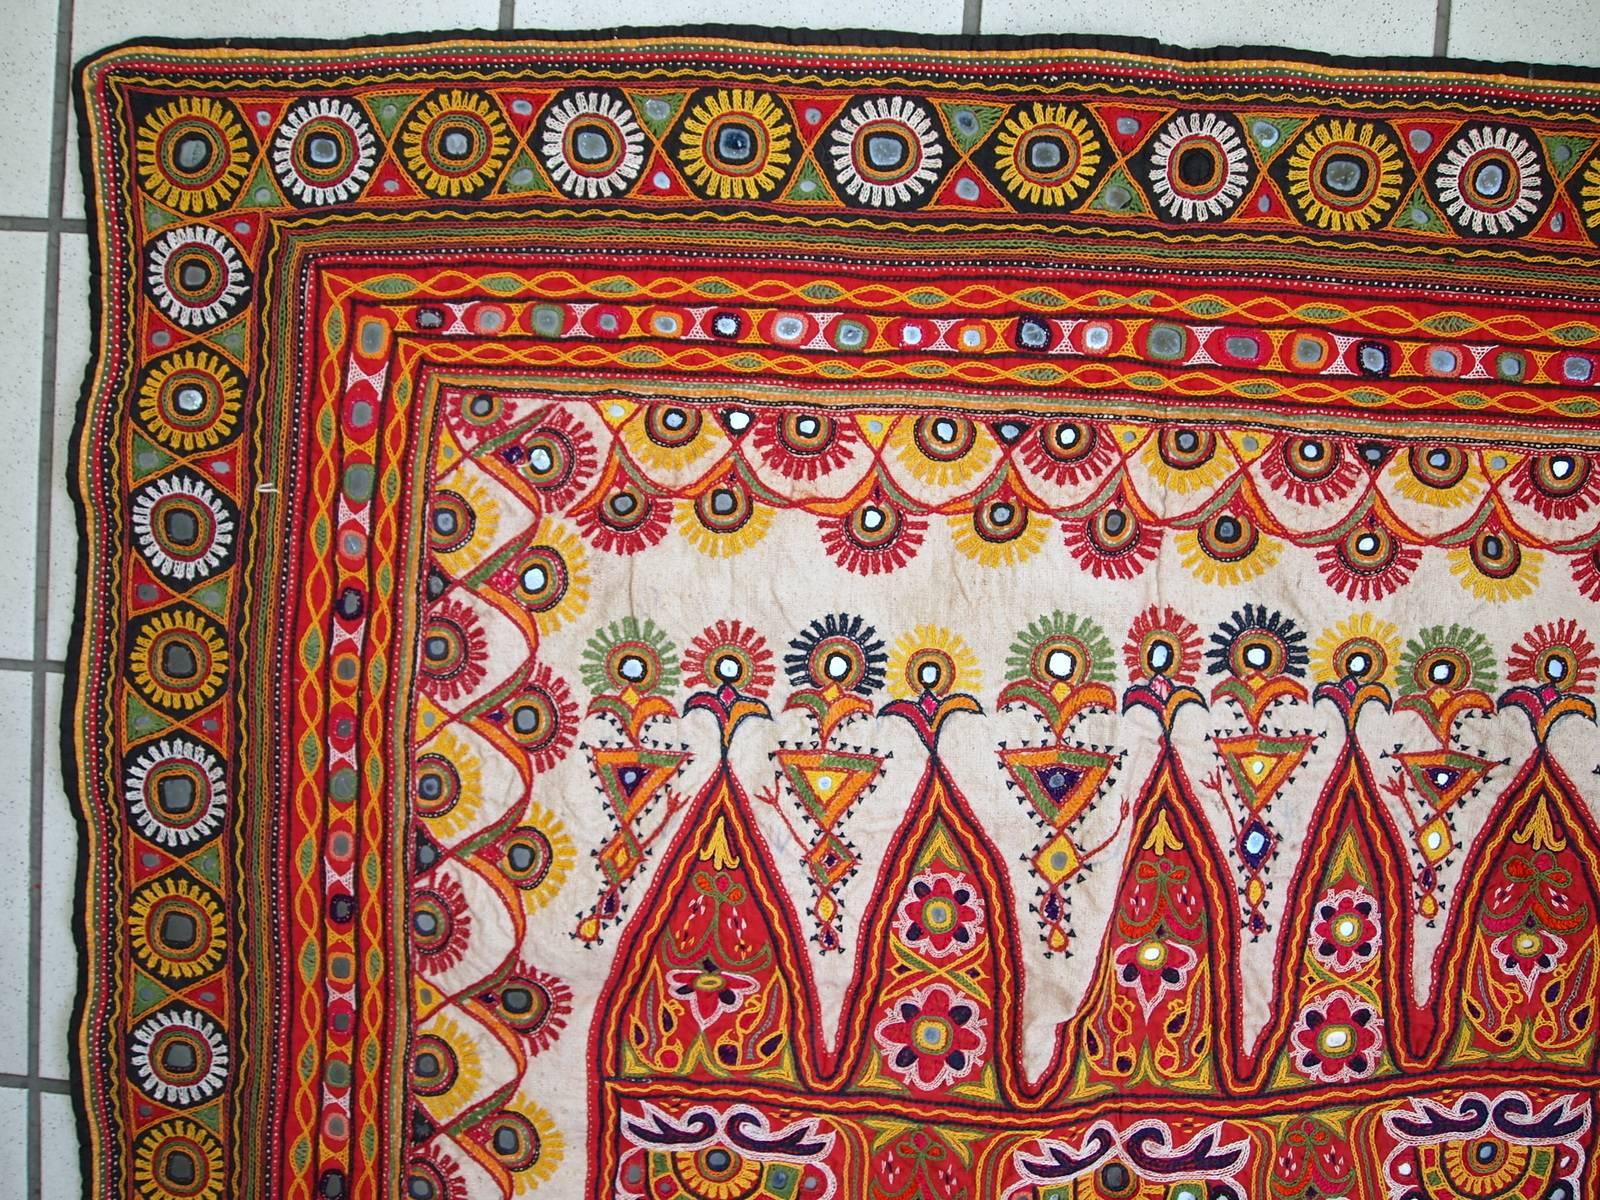 Handmade vintage Indian embroidery in original condition. This beautiful piece of art made in cotton. Beige background embroidered with colourful ornaments. The red crown is on top part and golden crown on the bottom. Some shiny metal parts are